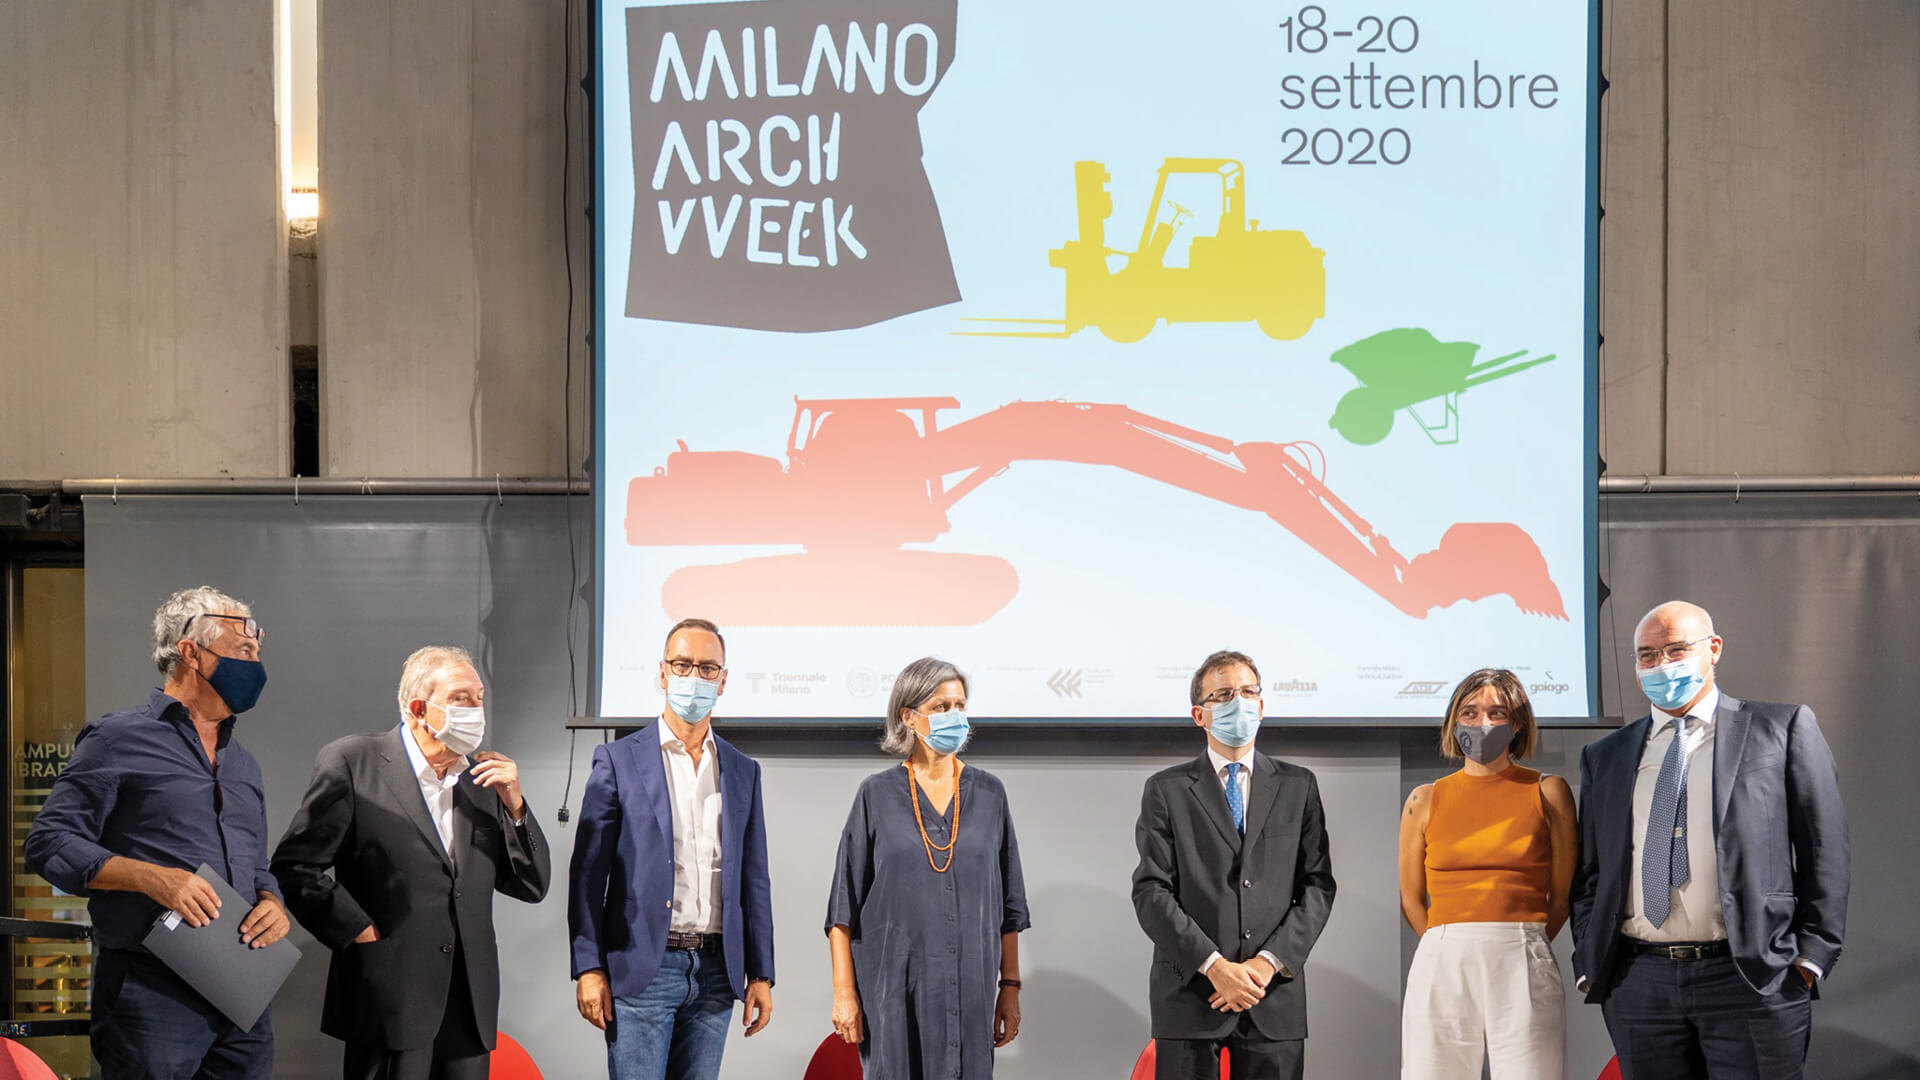 Milano Arch Week 2020 explores online and offline dimensions